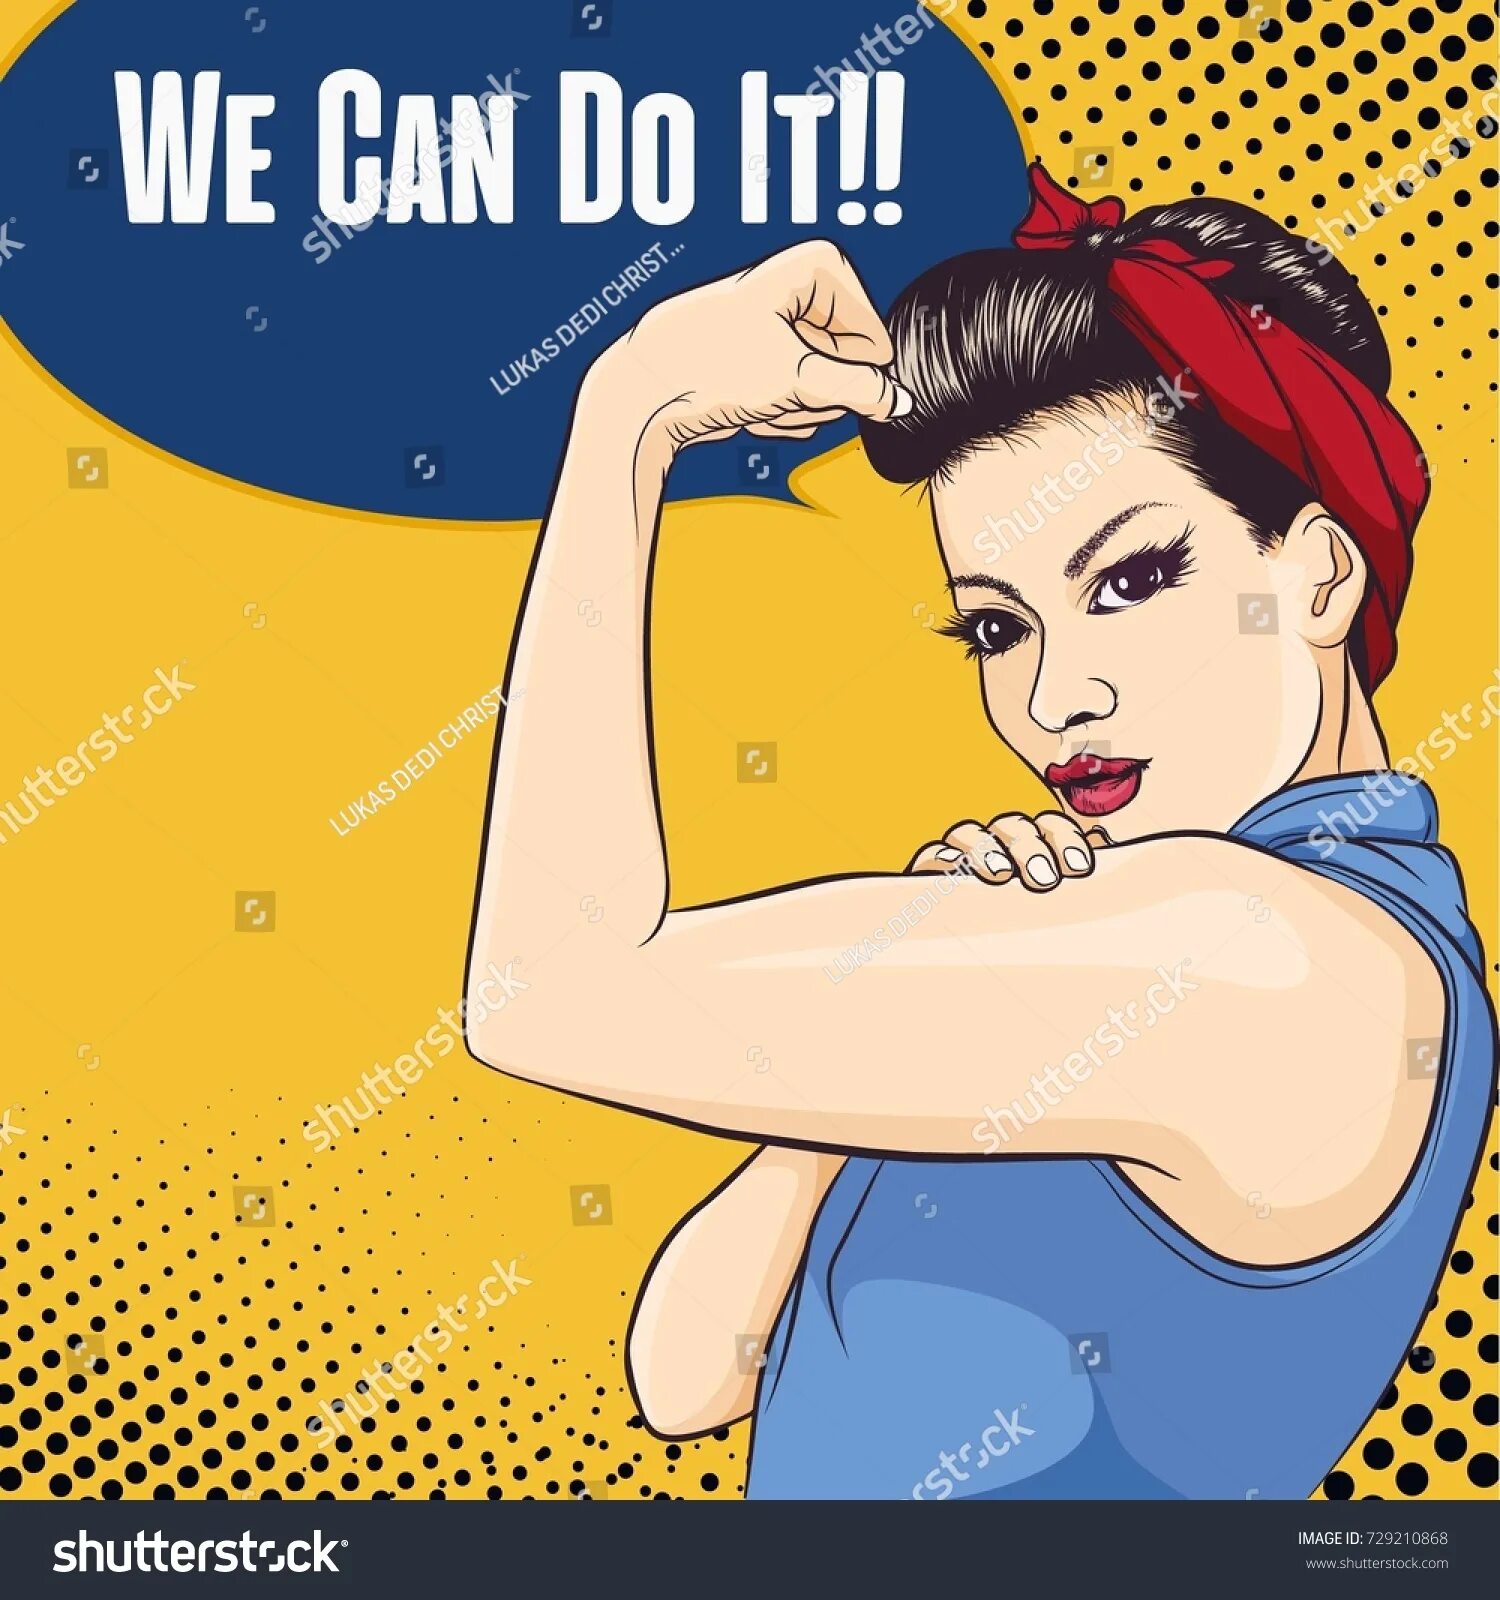 We can download. Феминизм we can do it. We can do it арт. Клепальщица Рози. Плакаты в стиле we can do it.